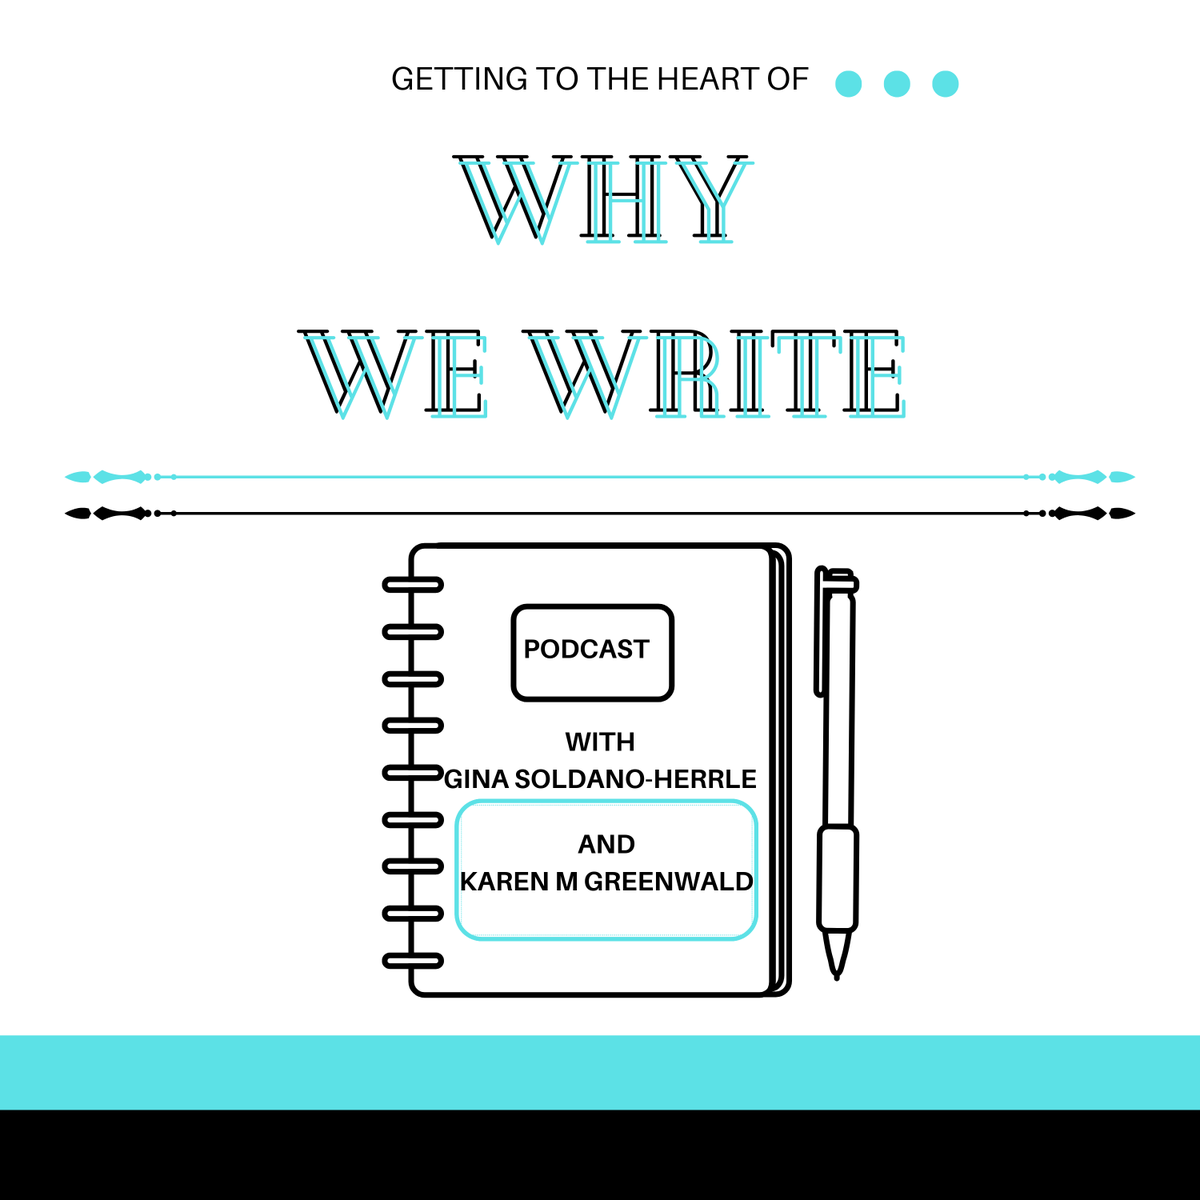 Check out episode 1 of #whywewrite my podcast of #authorinterviews getting to the heart of why we write. 
open.spotify.com/show/2T7DfB9aN…
#kidlit #author #AuthorsOfTwitter #writerscommunity #pbchallenge